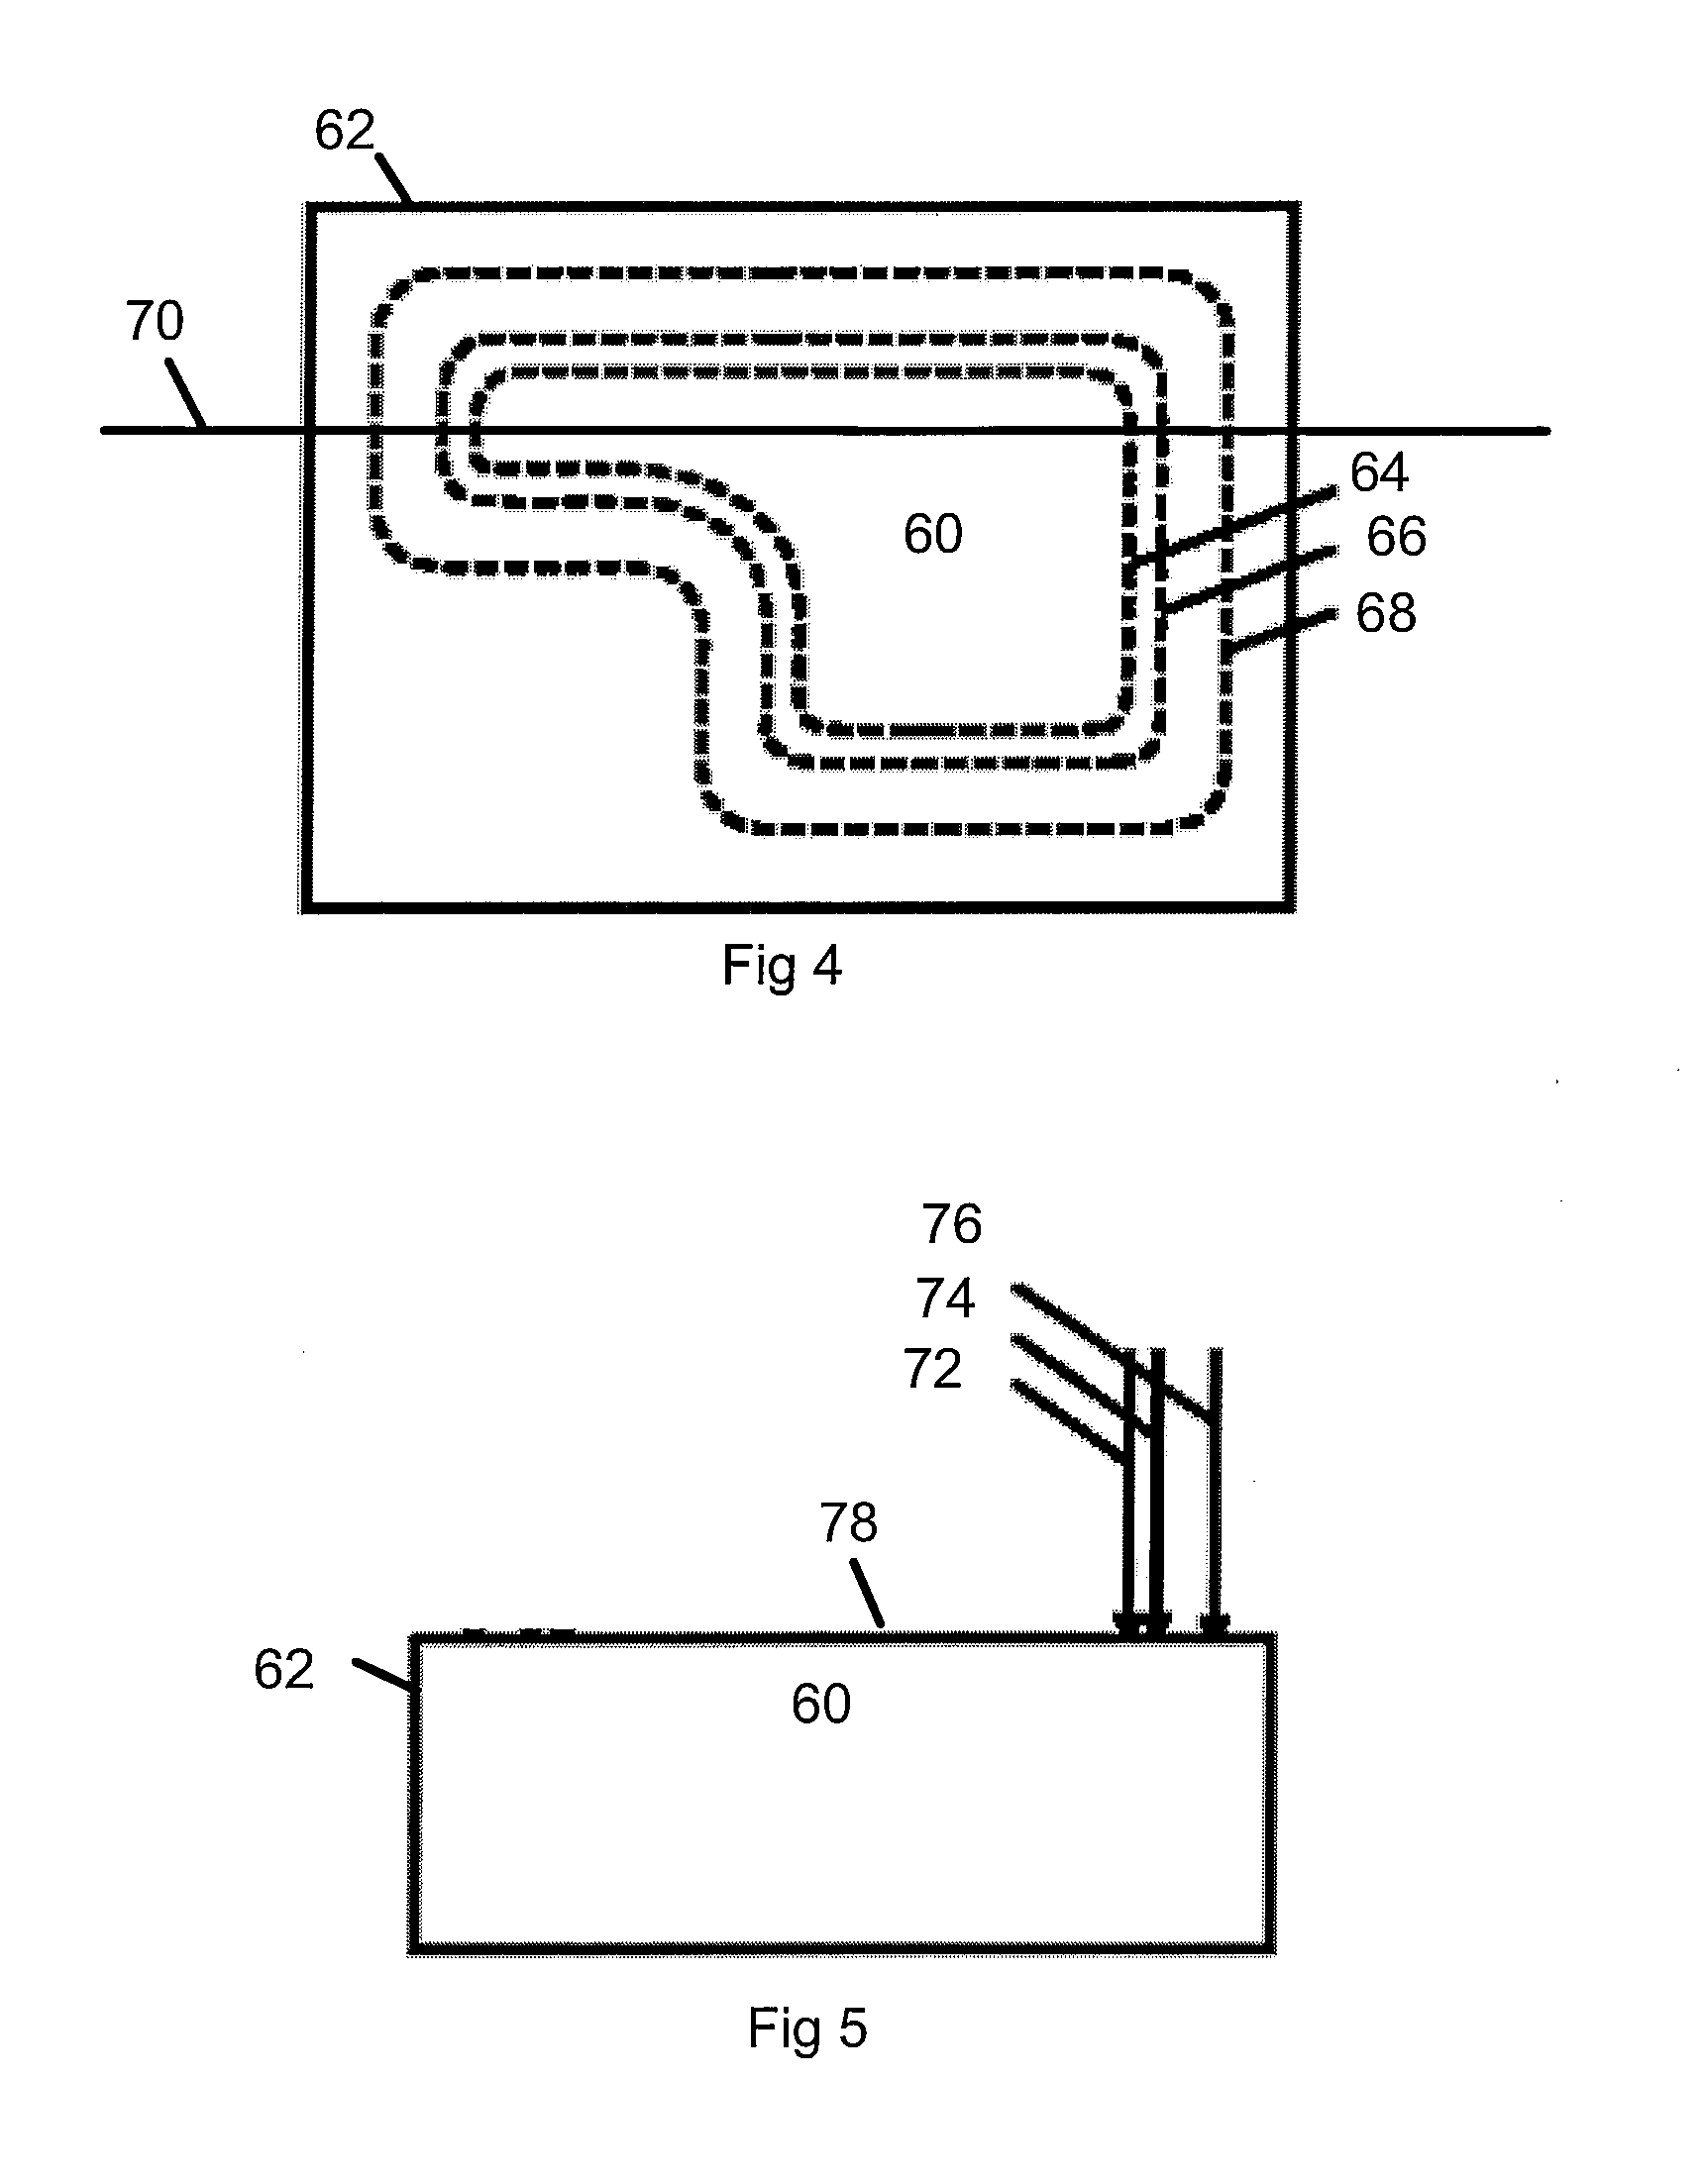 Method for laser processing glass with a chamfered edge